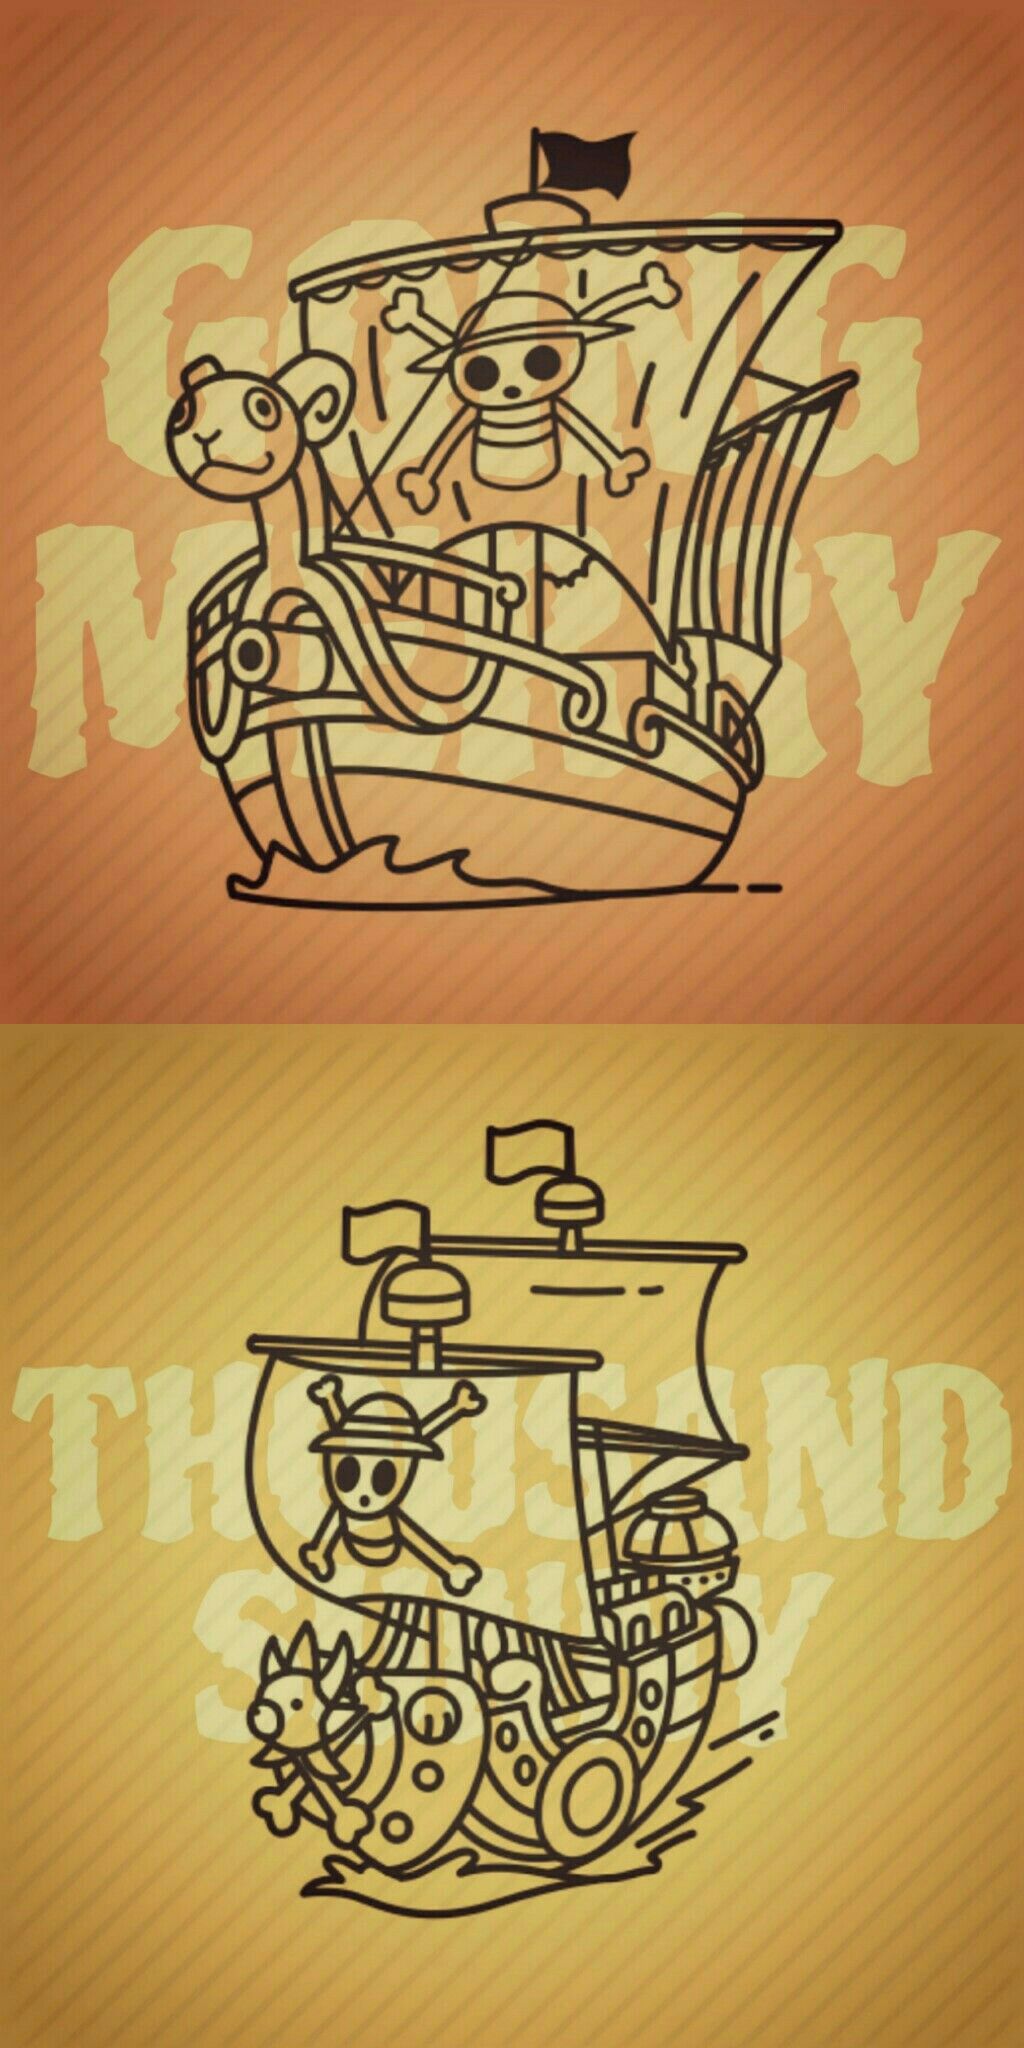 Going Merry and Thousand Sunny wallpaper edited by 'yannalogy